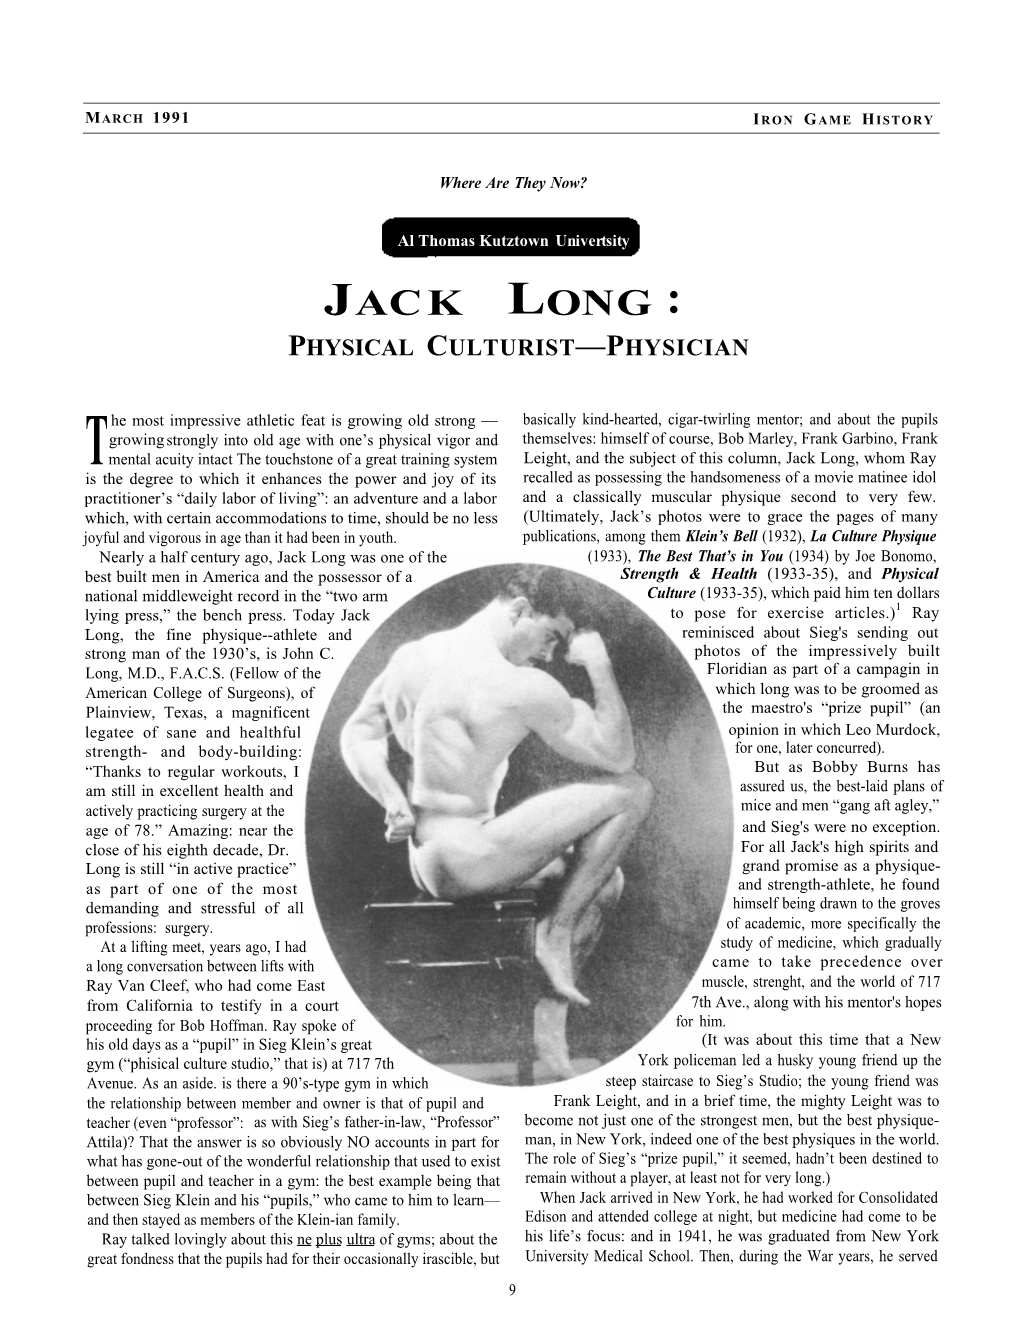 Where Are They Now? Jack Long: Physical Culturist